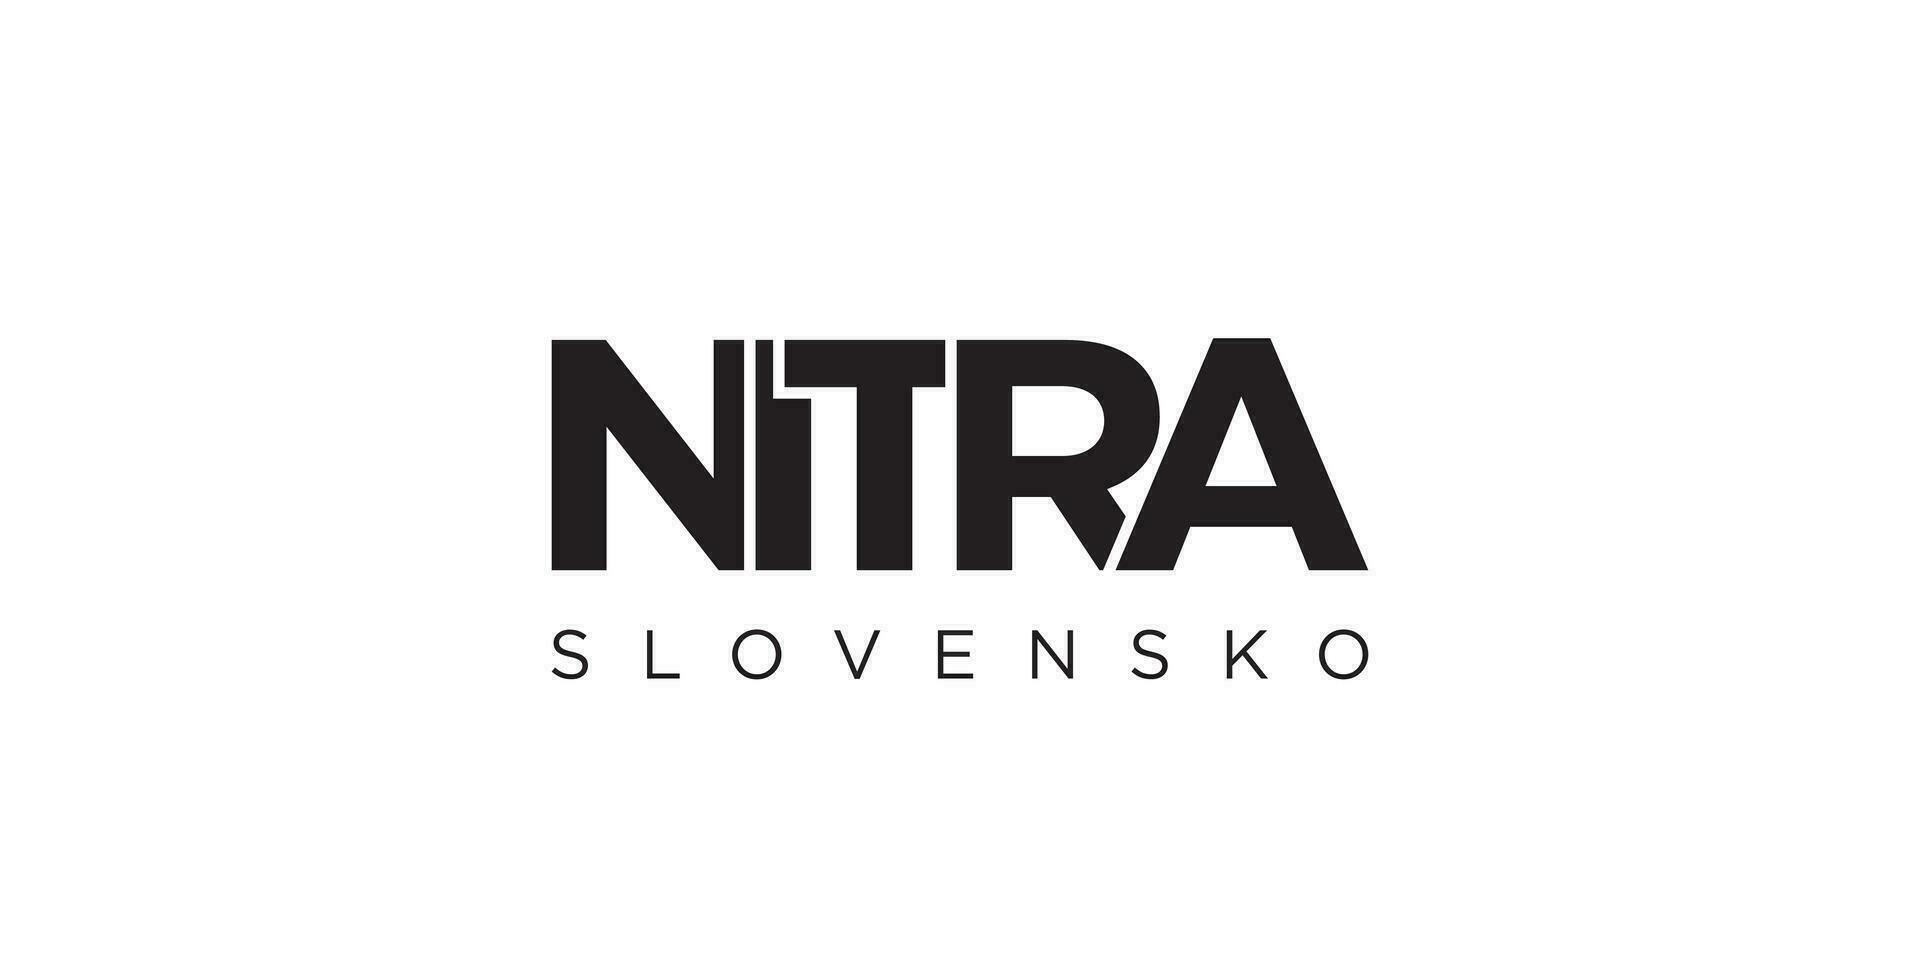 Nitra in the Slovakia emblem. The design features a geometric style, vector illustration with bold typography in a modern font. The graphic slogan lettering.